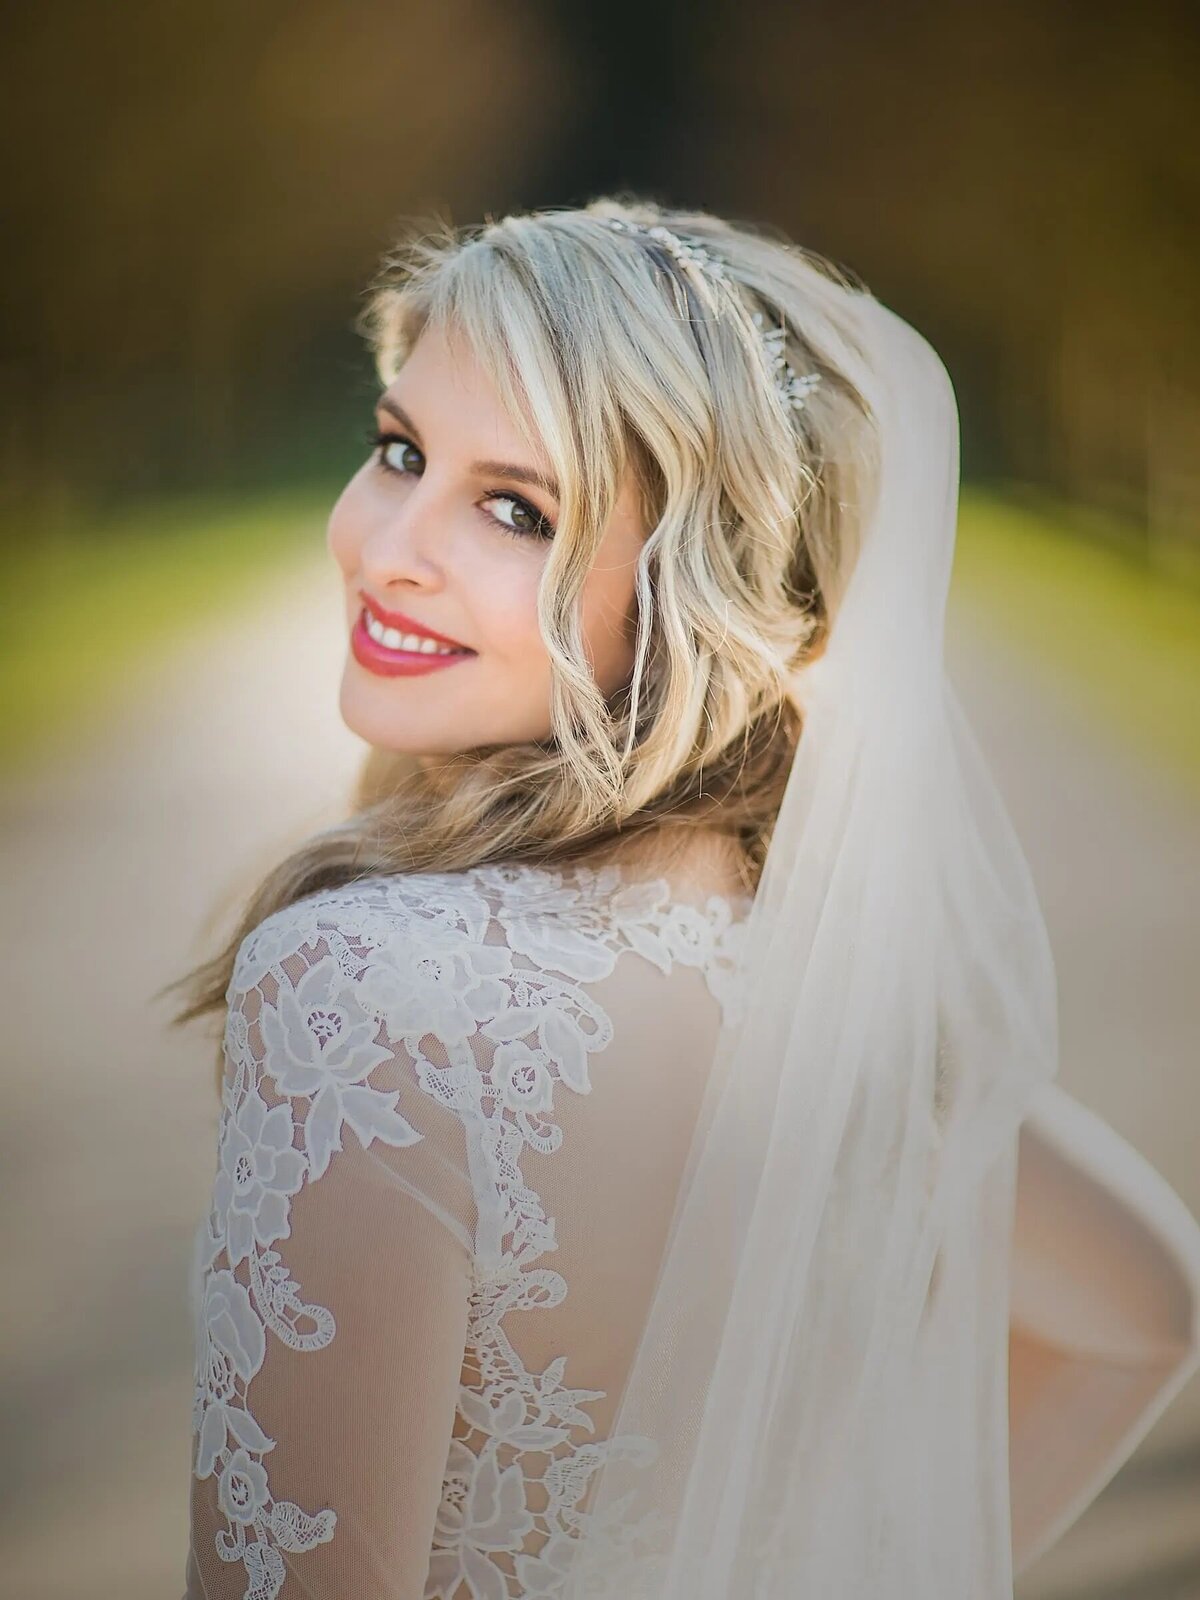 A bride smiling and looking back over her shoulders